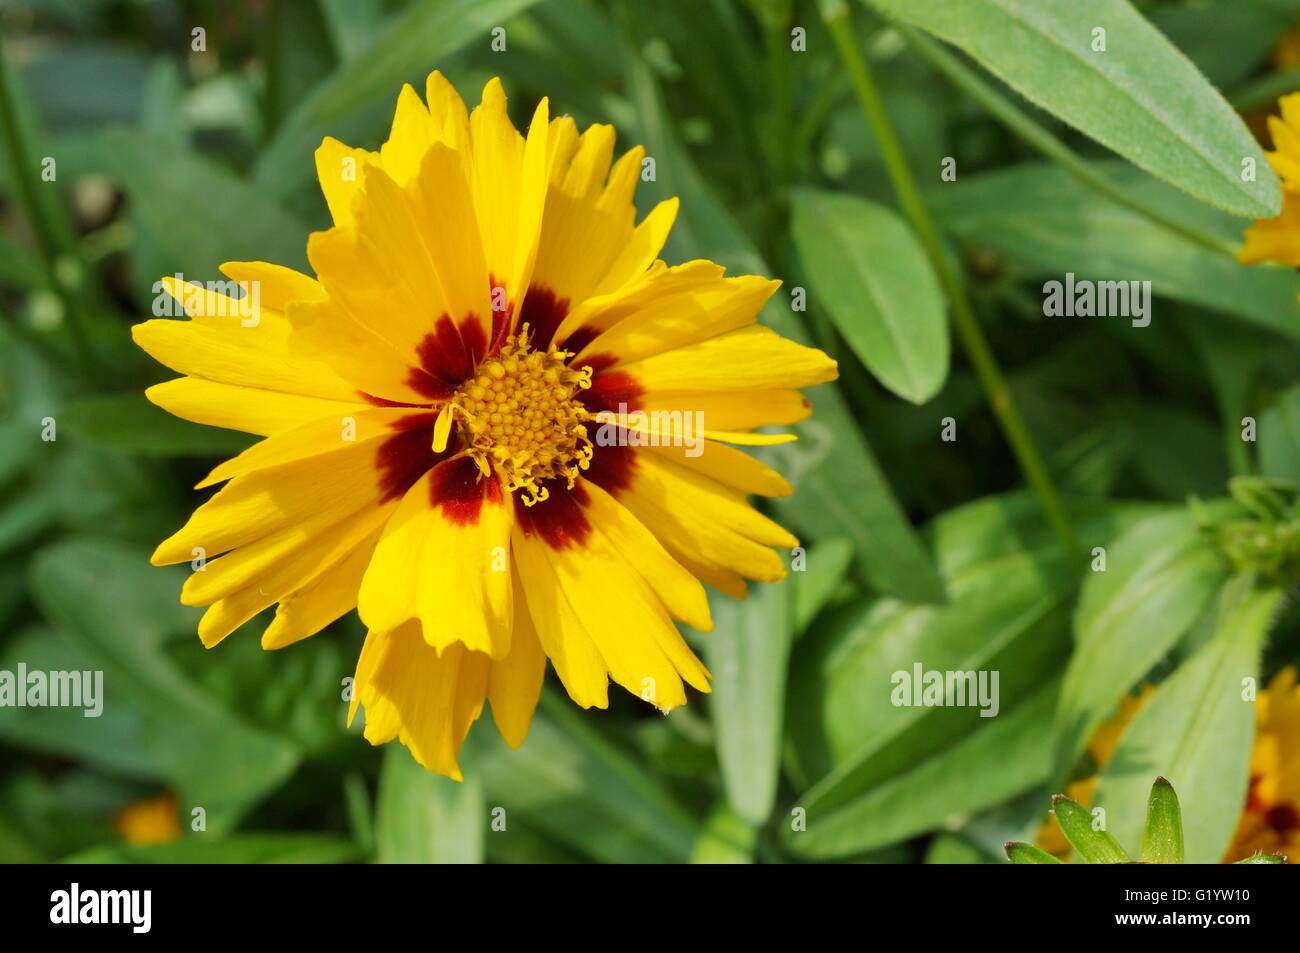 Yellow coreopsis flower with a dark center Stock Photo